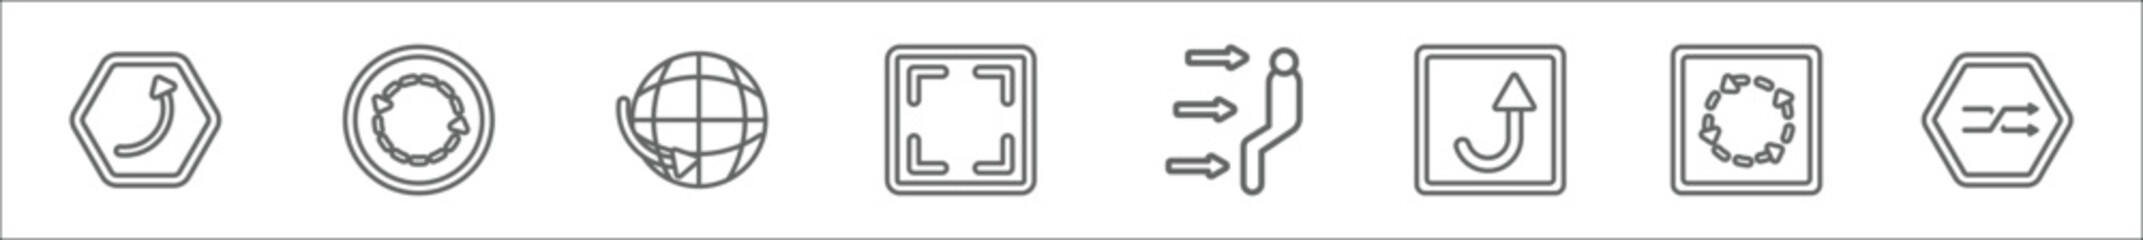 outline set of user interface line icons. linear vector icons such as spinning left arrow, looping arrows, worldgrid, size, air outlet, swirly arrow pointing upwards, looping arrows with broken